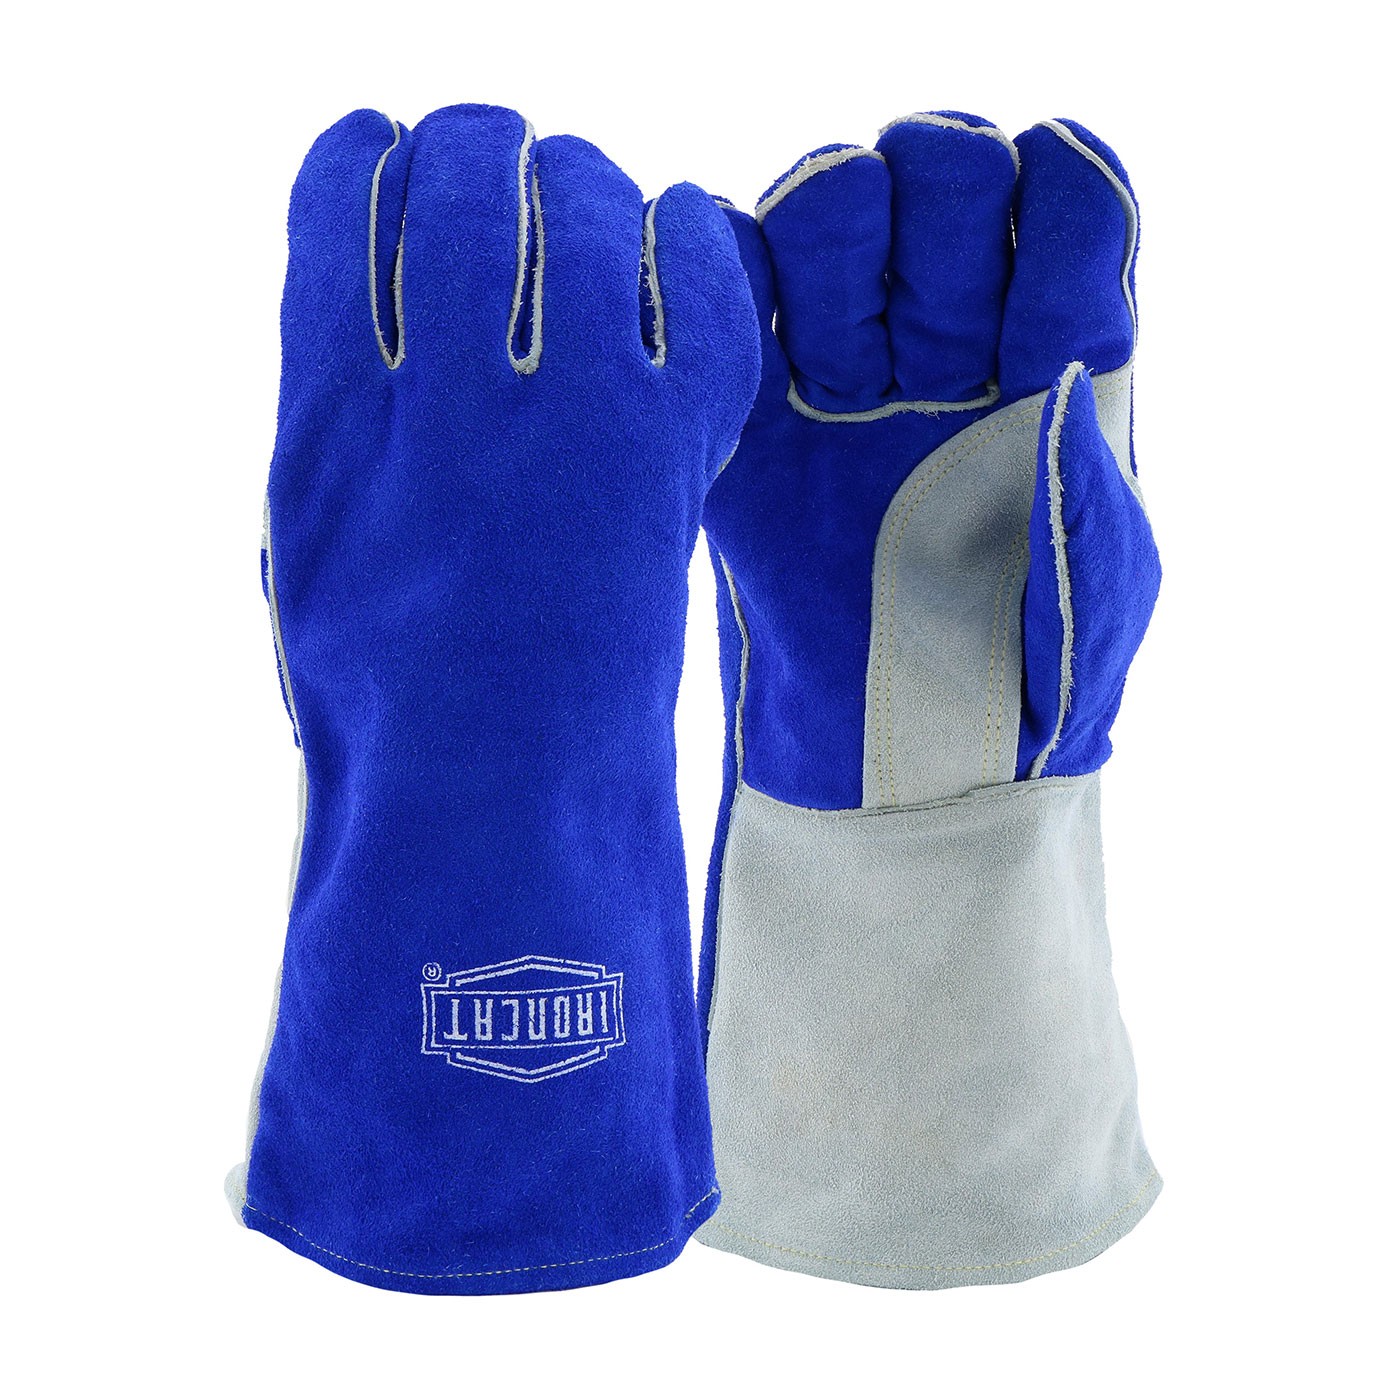 Ironcat® Premium Side Split Cowhide Leather Welder's Glove with Cotton Foam Liner and Kevlar® Stitching  (#9051)